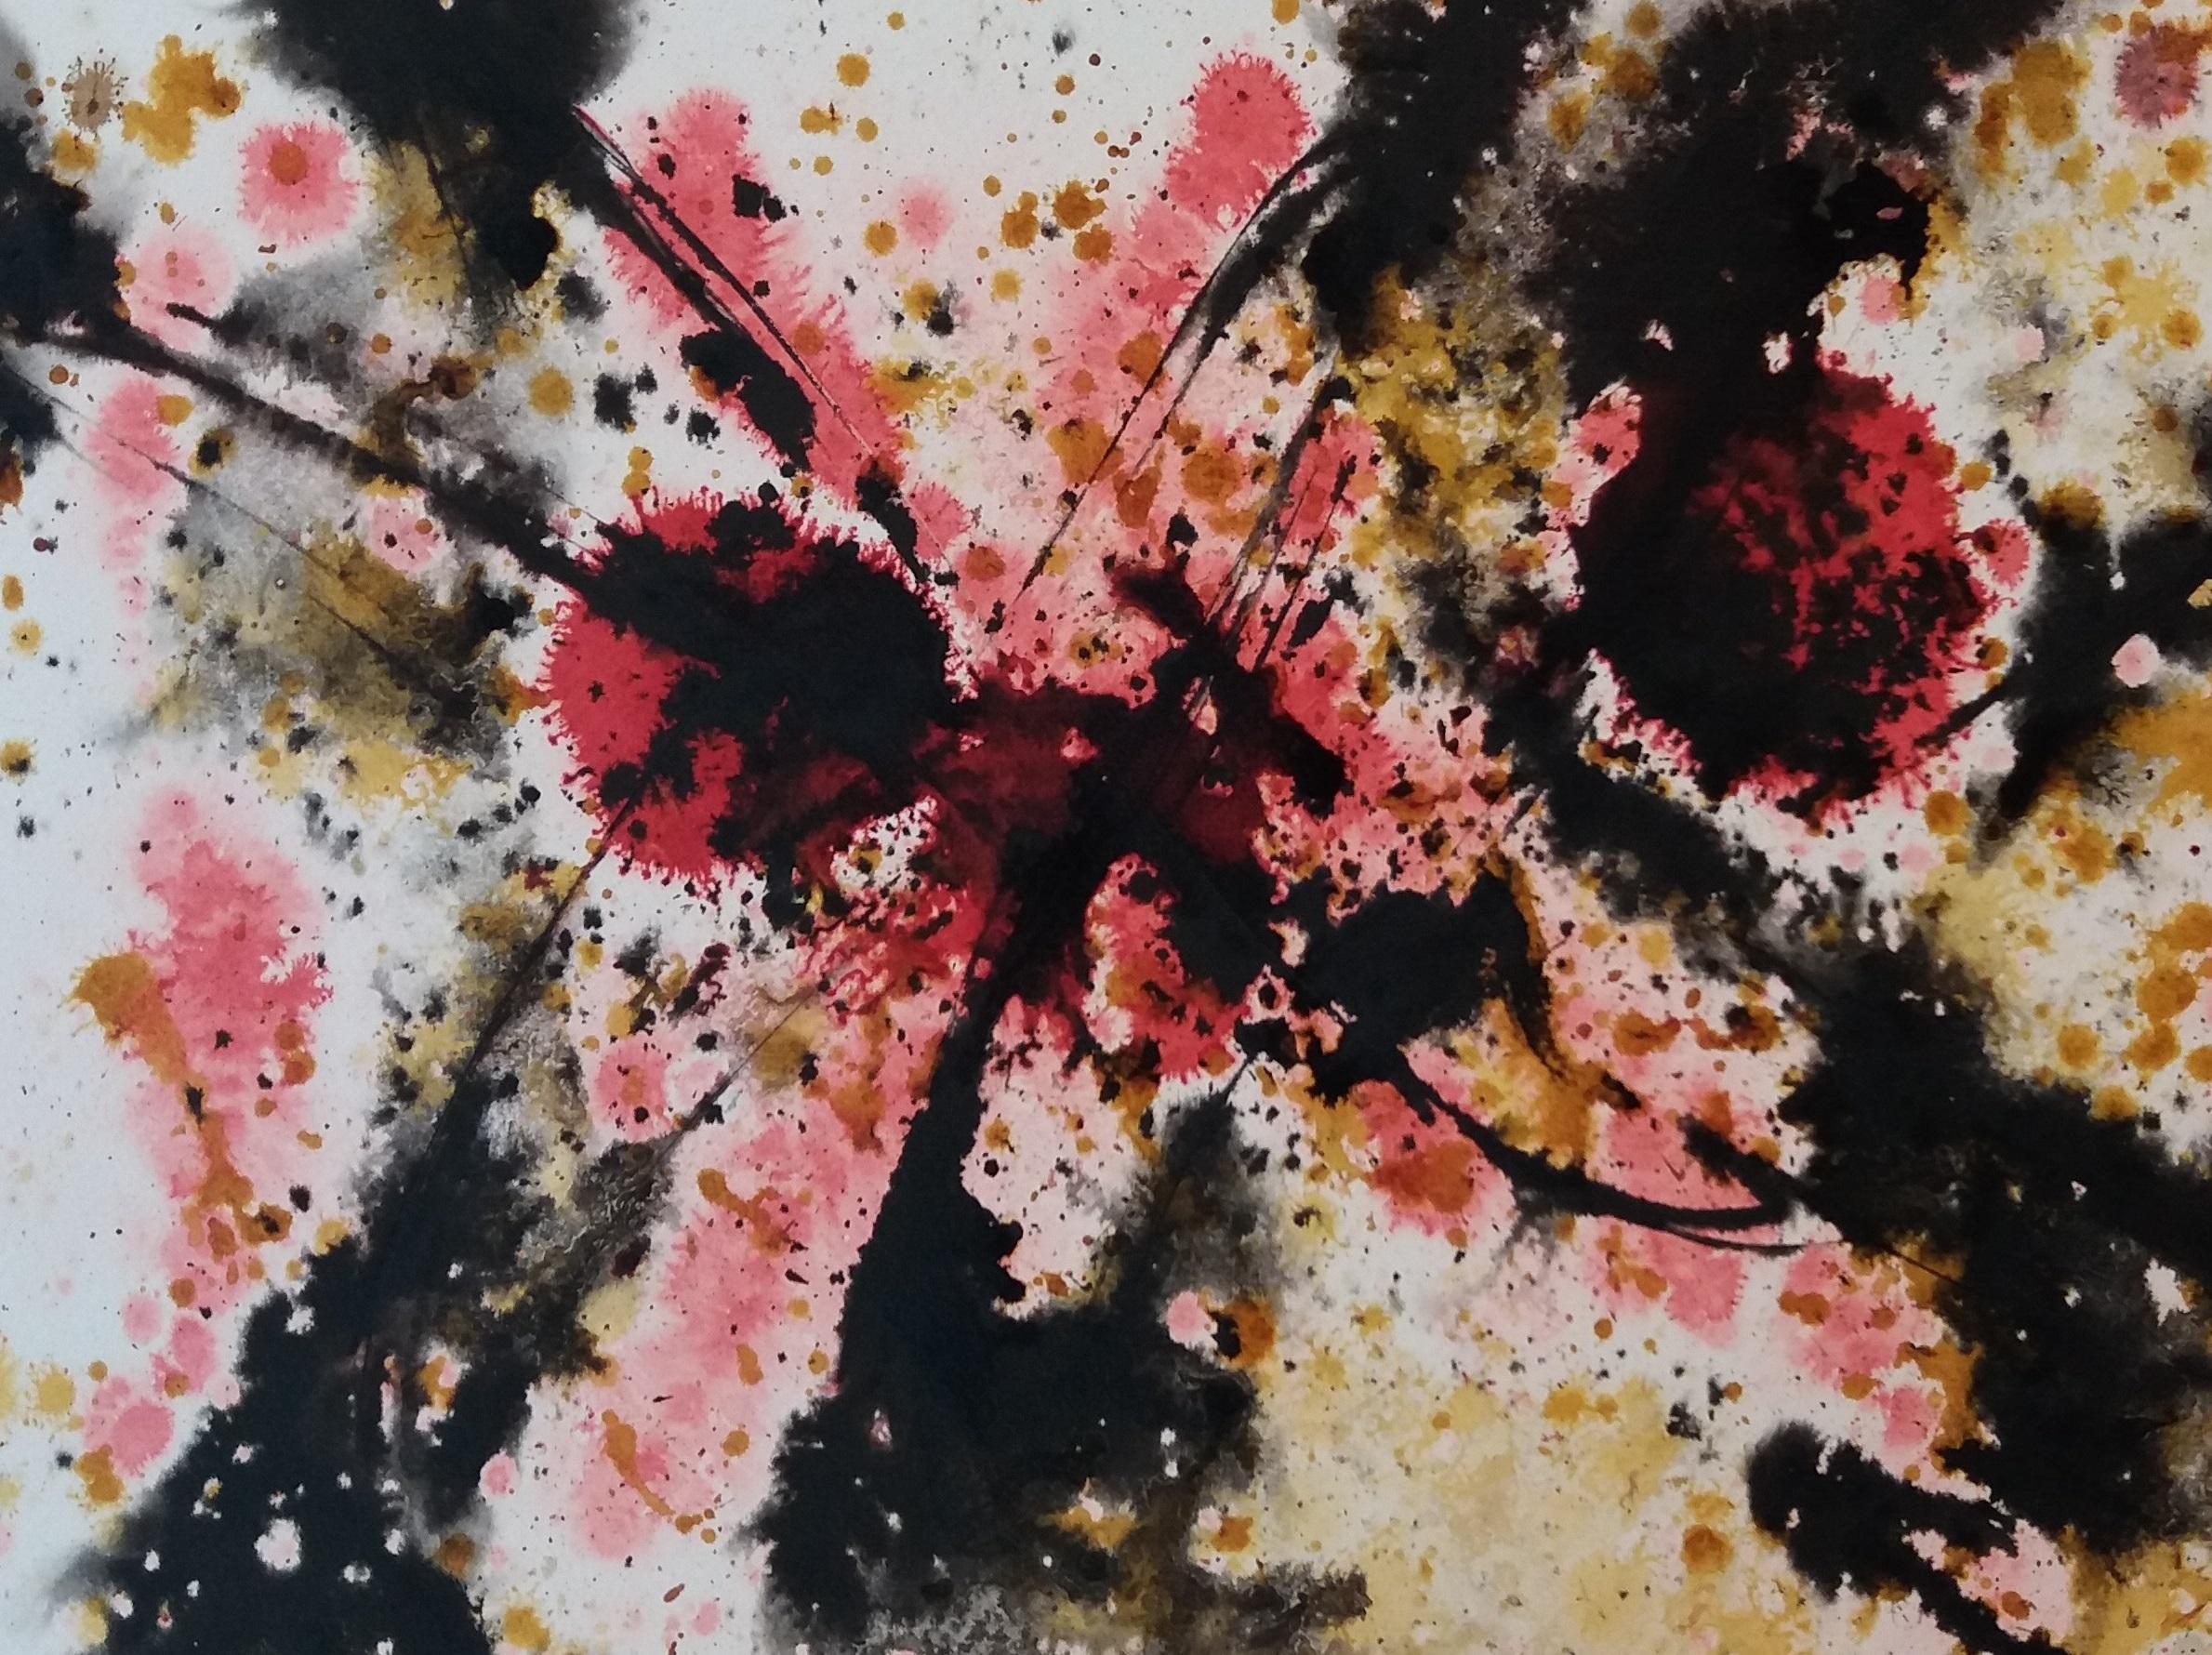 Tharrats  7 Red  Black  Constellation 7 original acrylic paper painting - Painting by Josep THARRATS